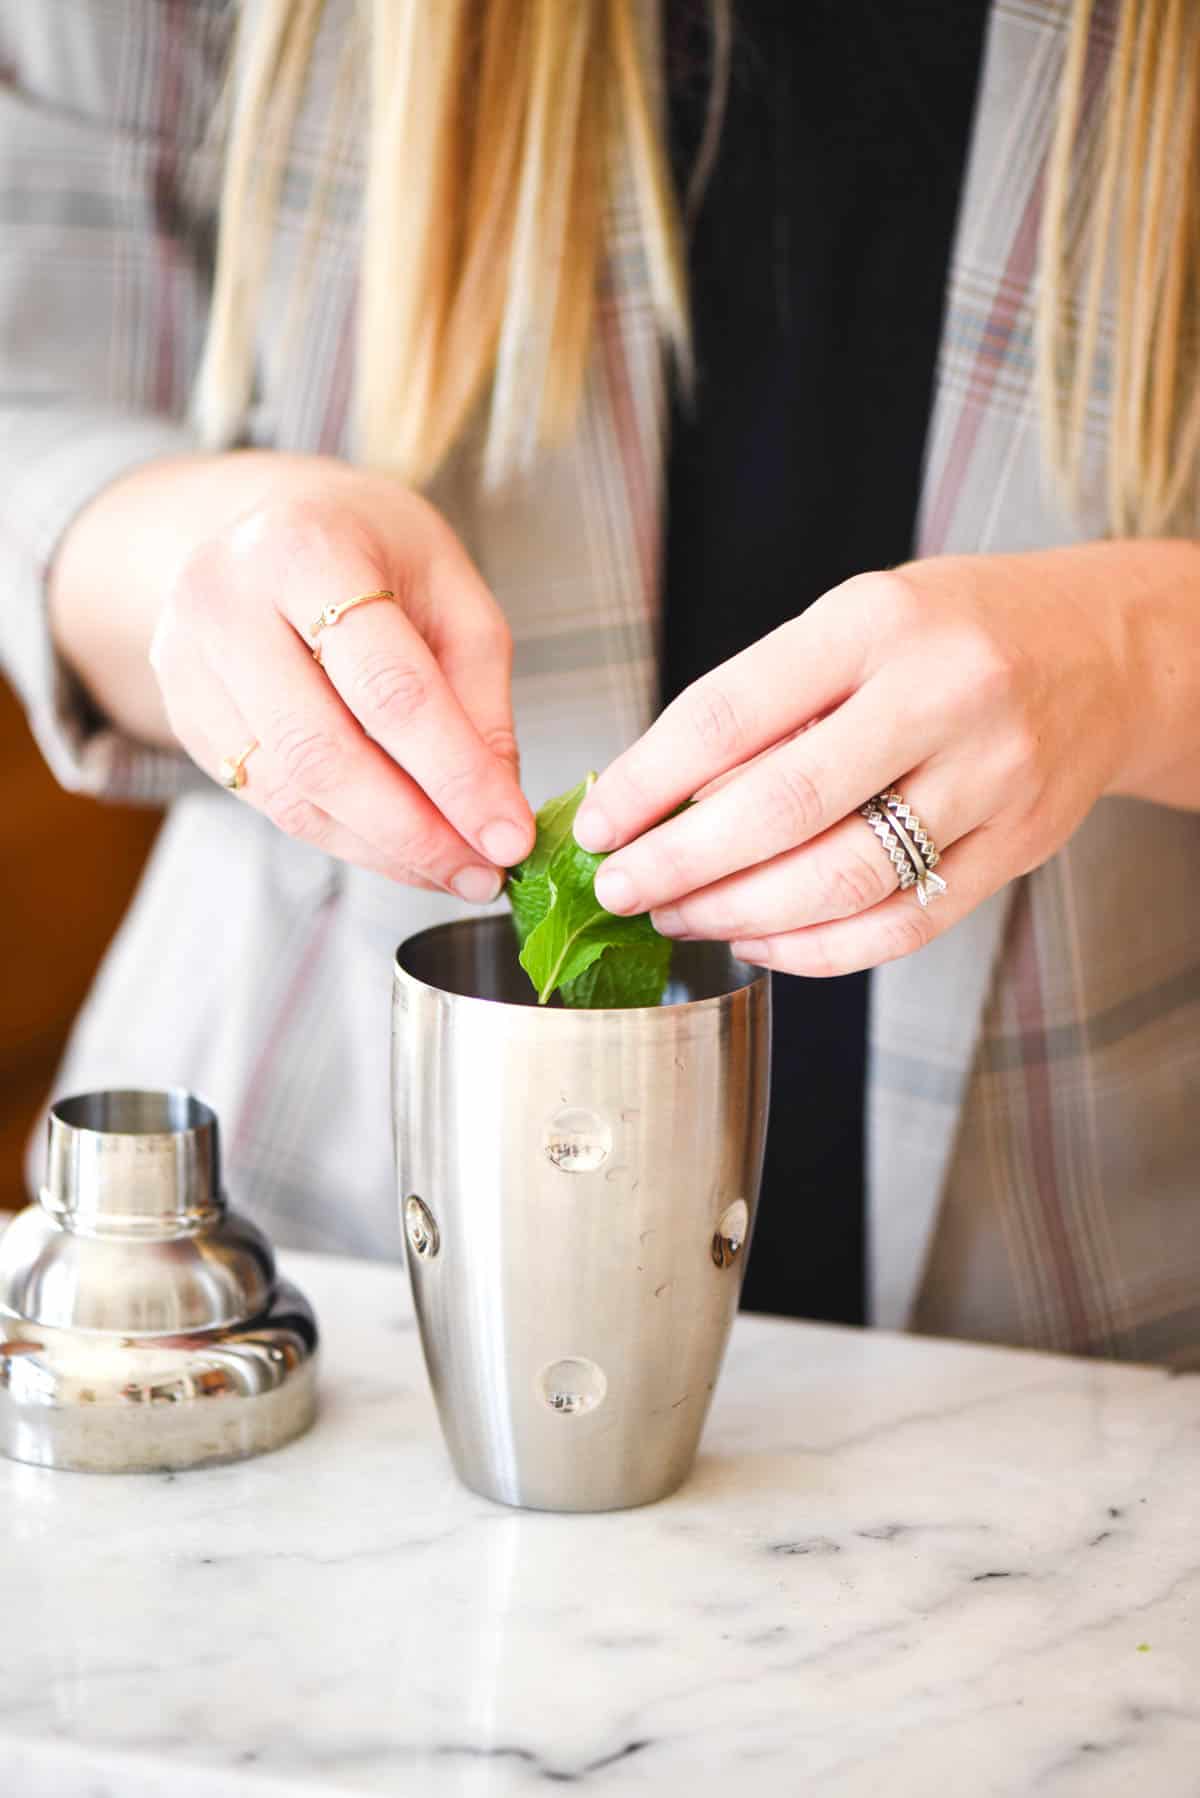 Woman adding fresh mint to a cocktail shaker.